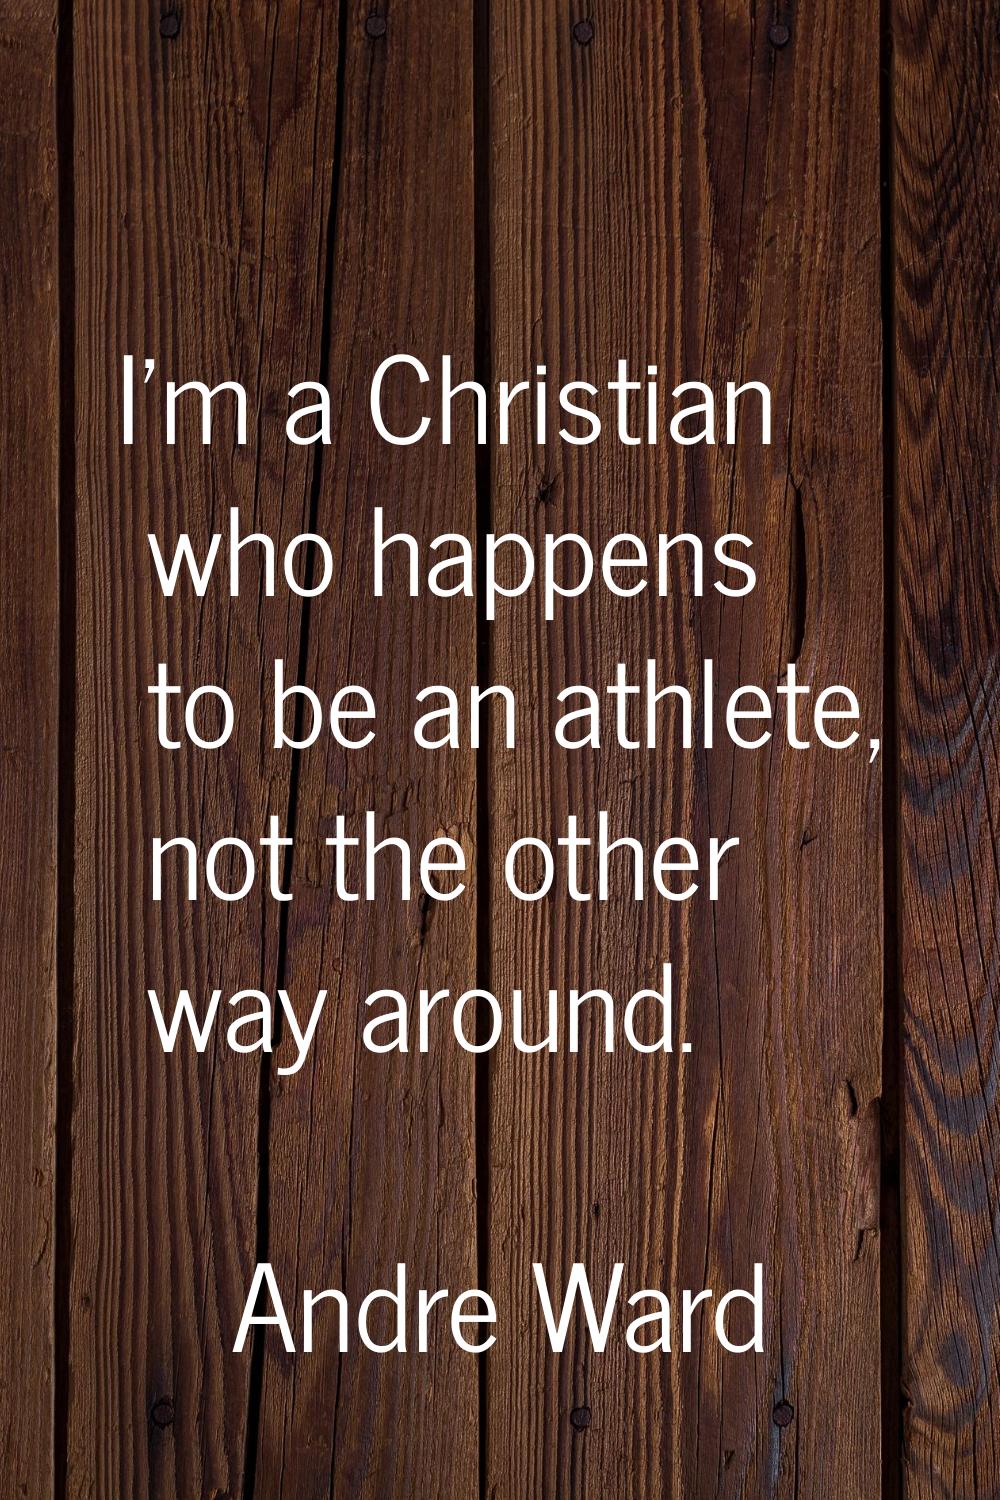 I'm a Christian who happens to be an athlete, not the other way around.